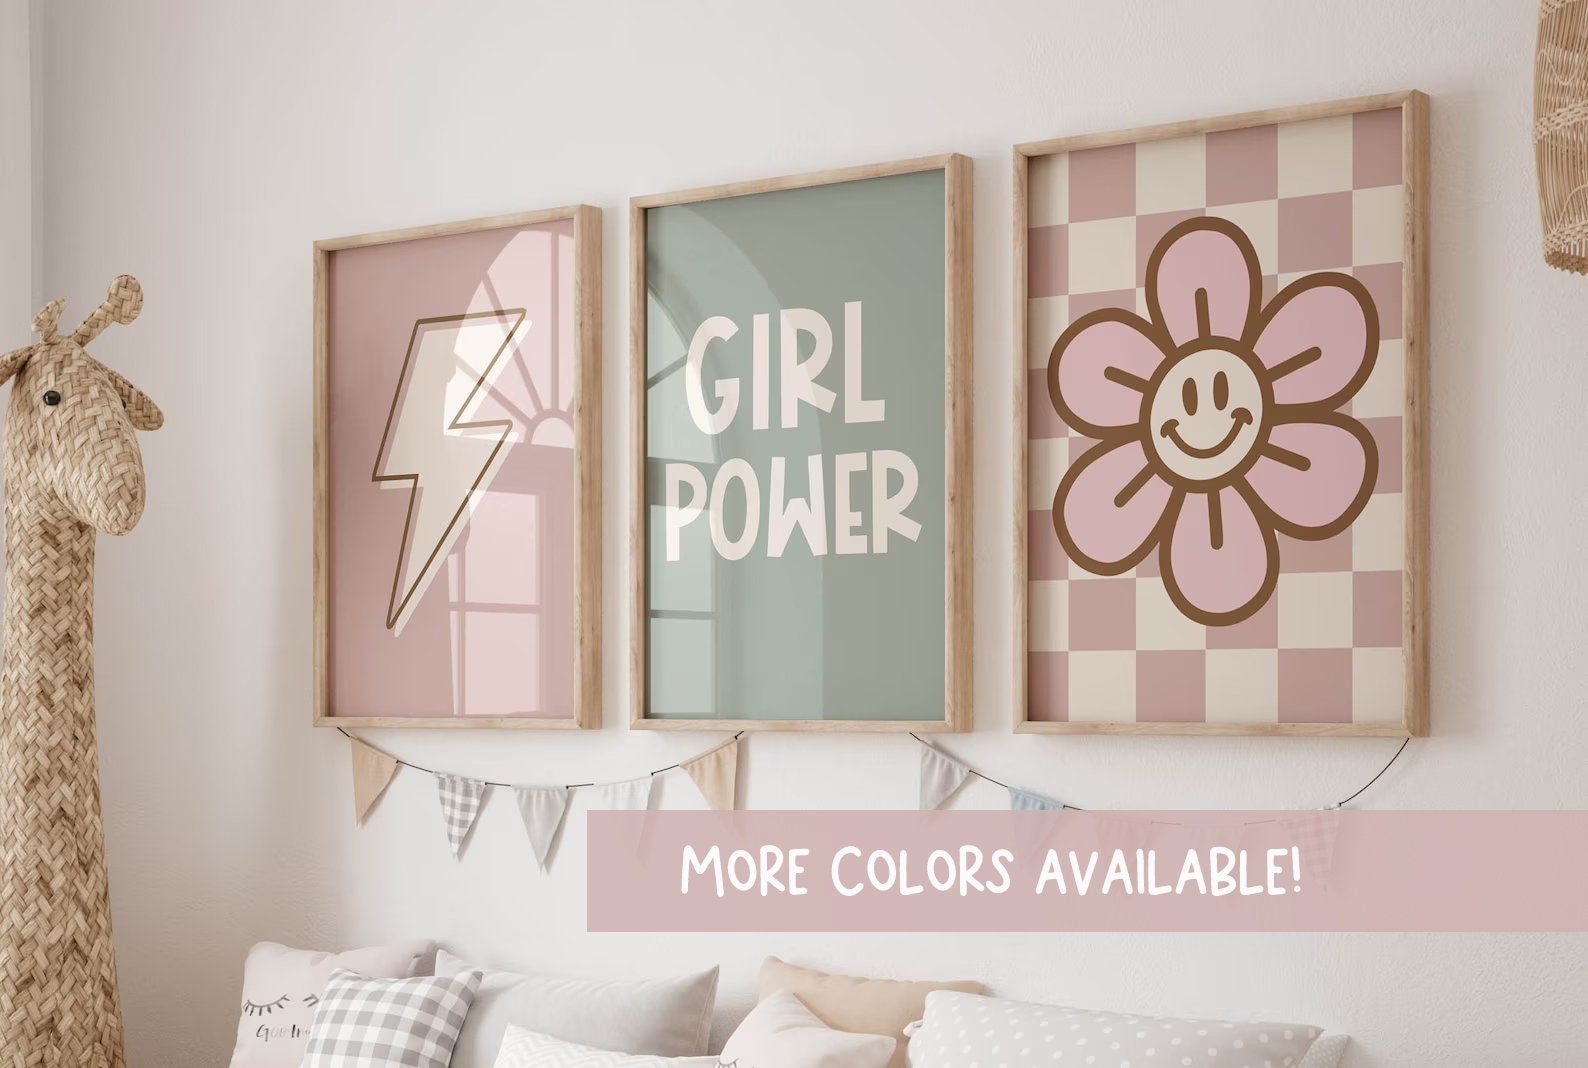 Smile Art Design Girl Power Quote Diversity Kids Gilrs African American White and Black Canvas Print Kids Room Decor Wall Art Baby Room Deco - 3